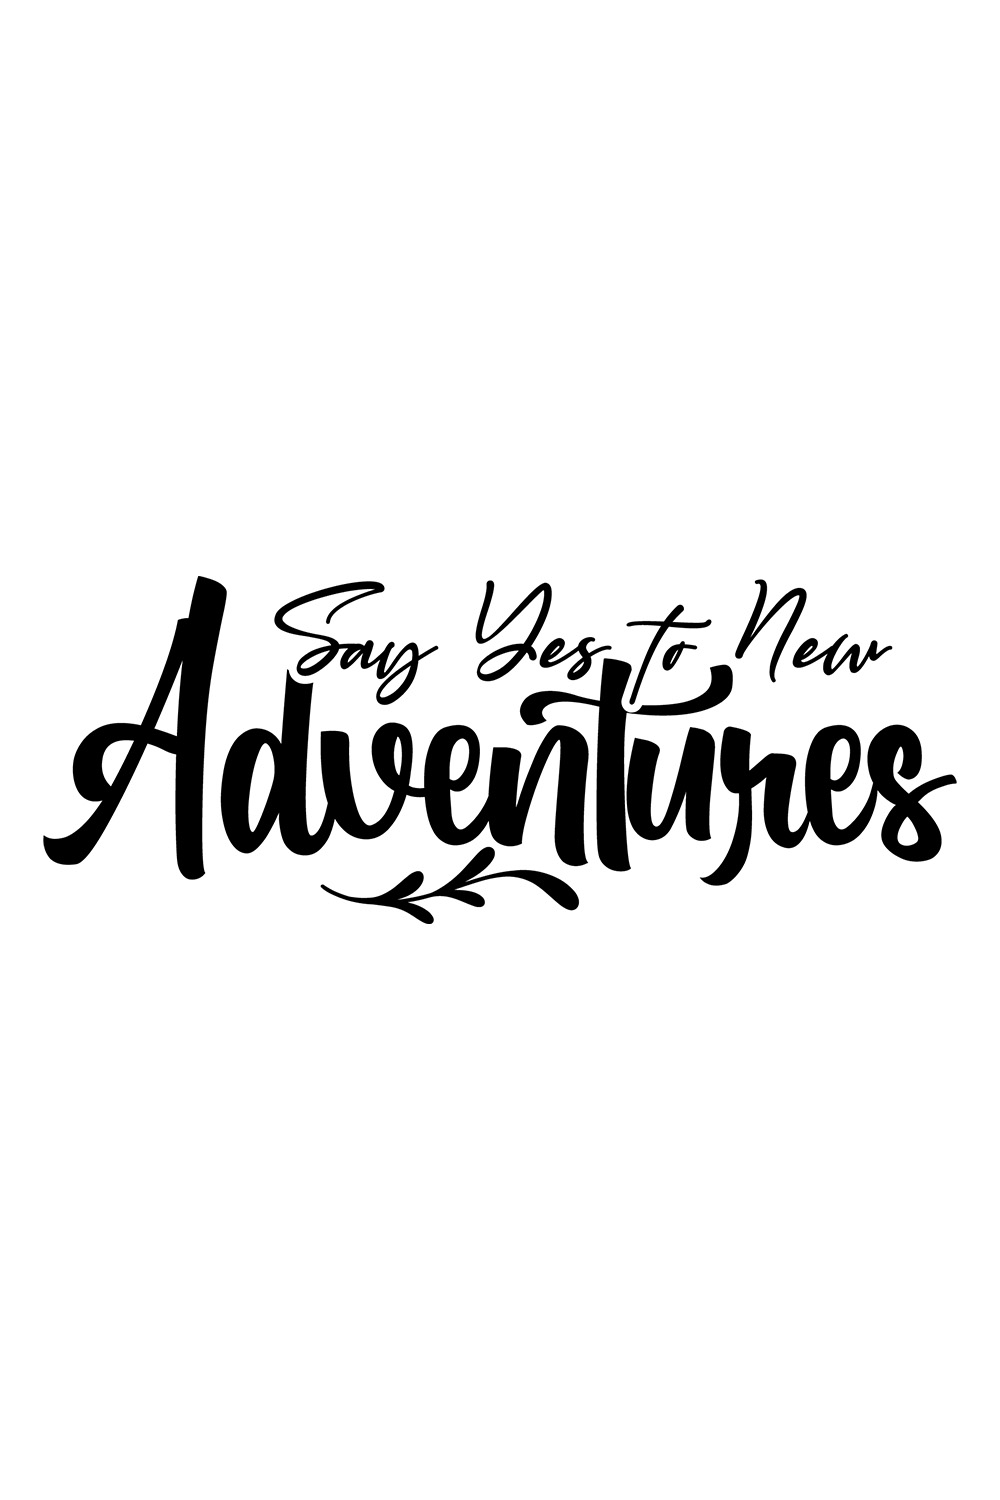 Image with charming black lettering for prints Say Yes To New Adventures.